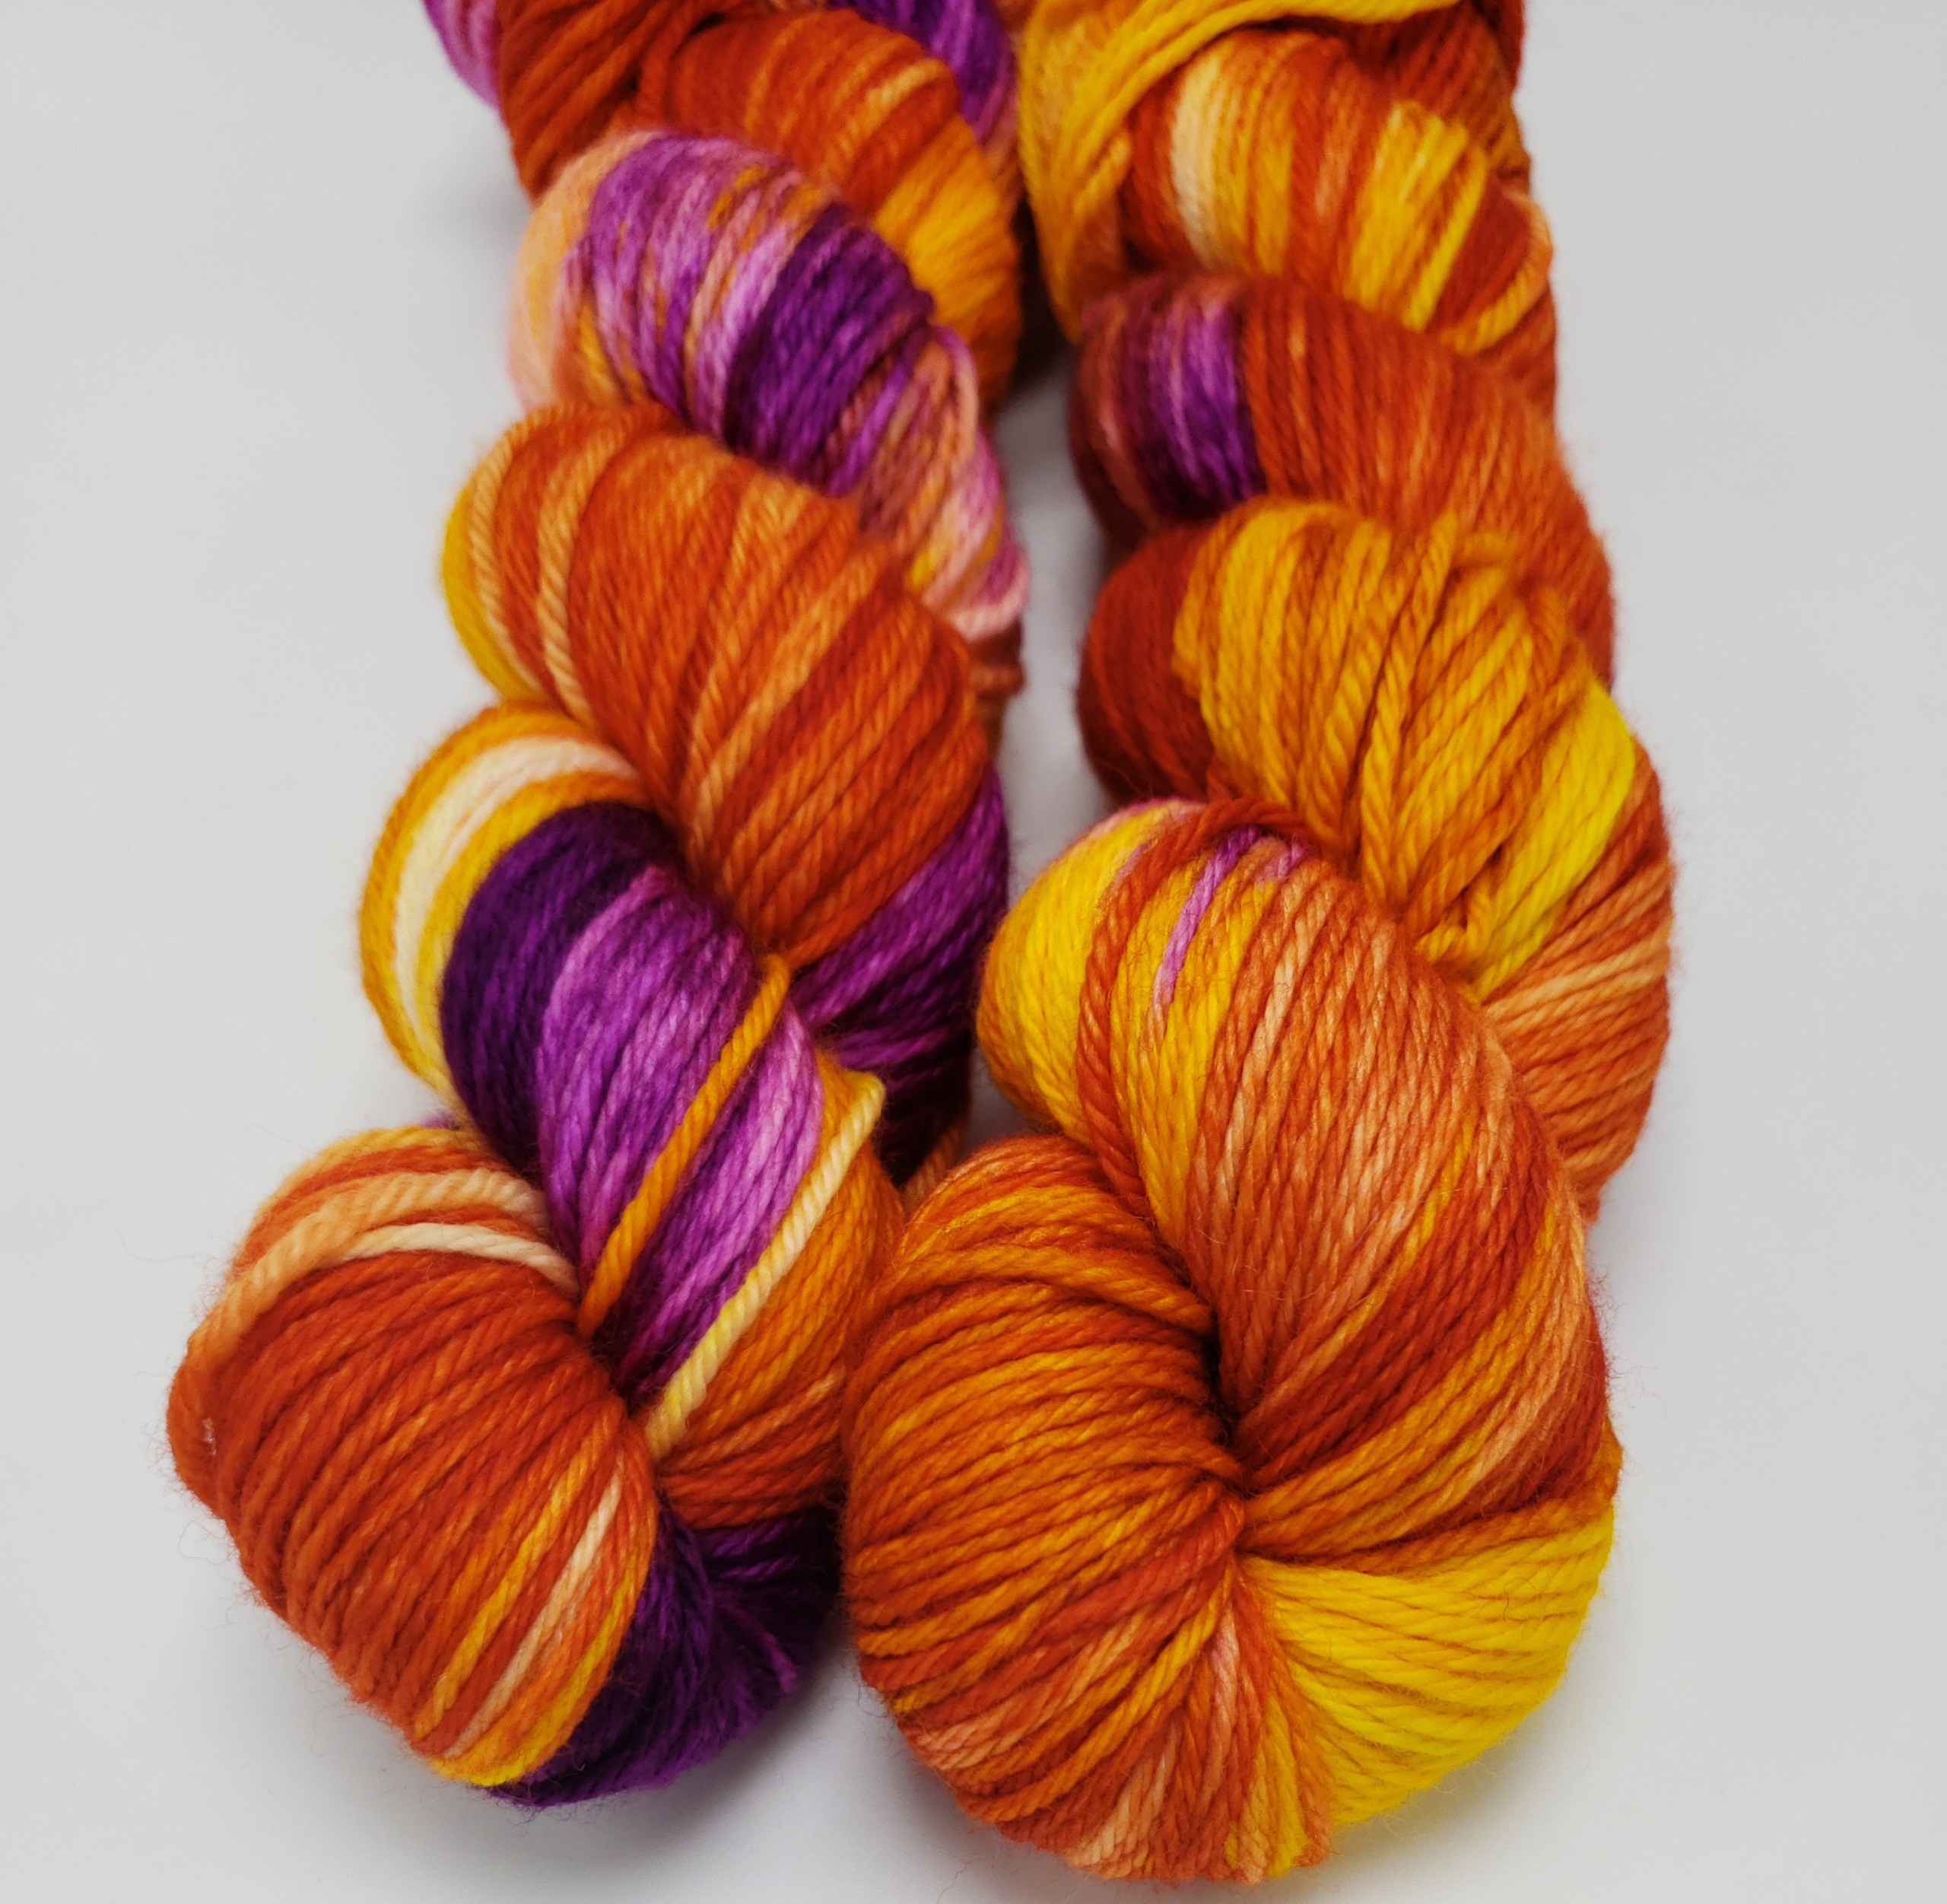 Tropical Sunset Superwash Worsted Weight Indie Dyed Yarn for Knitting ...